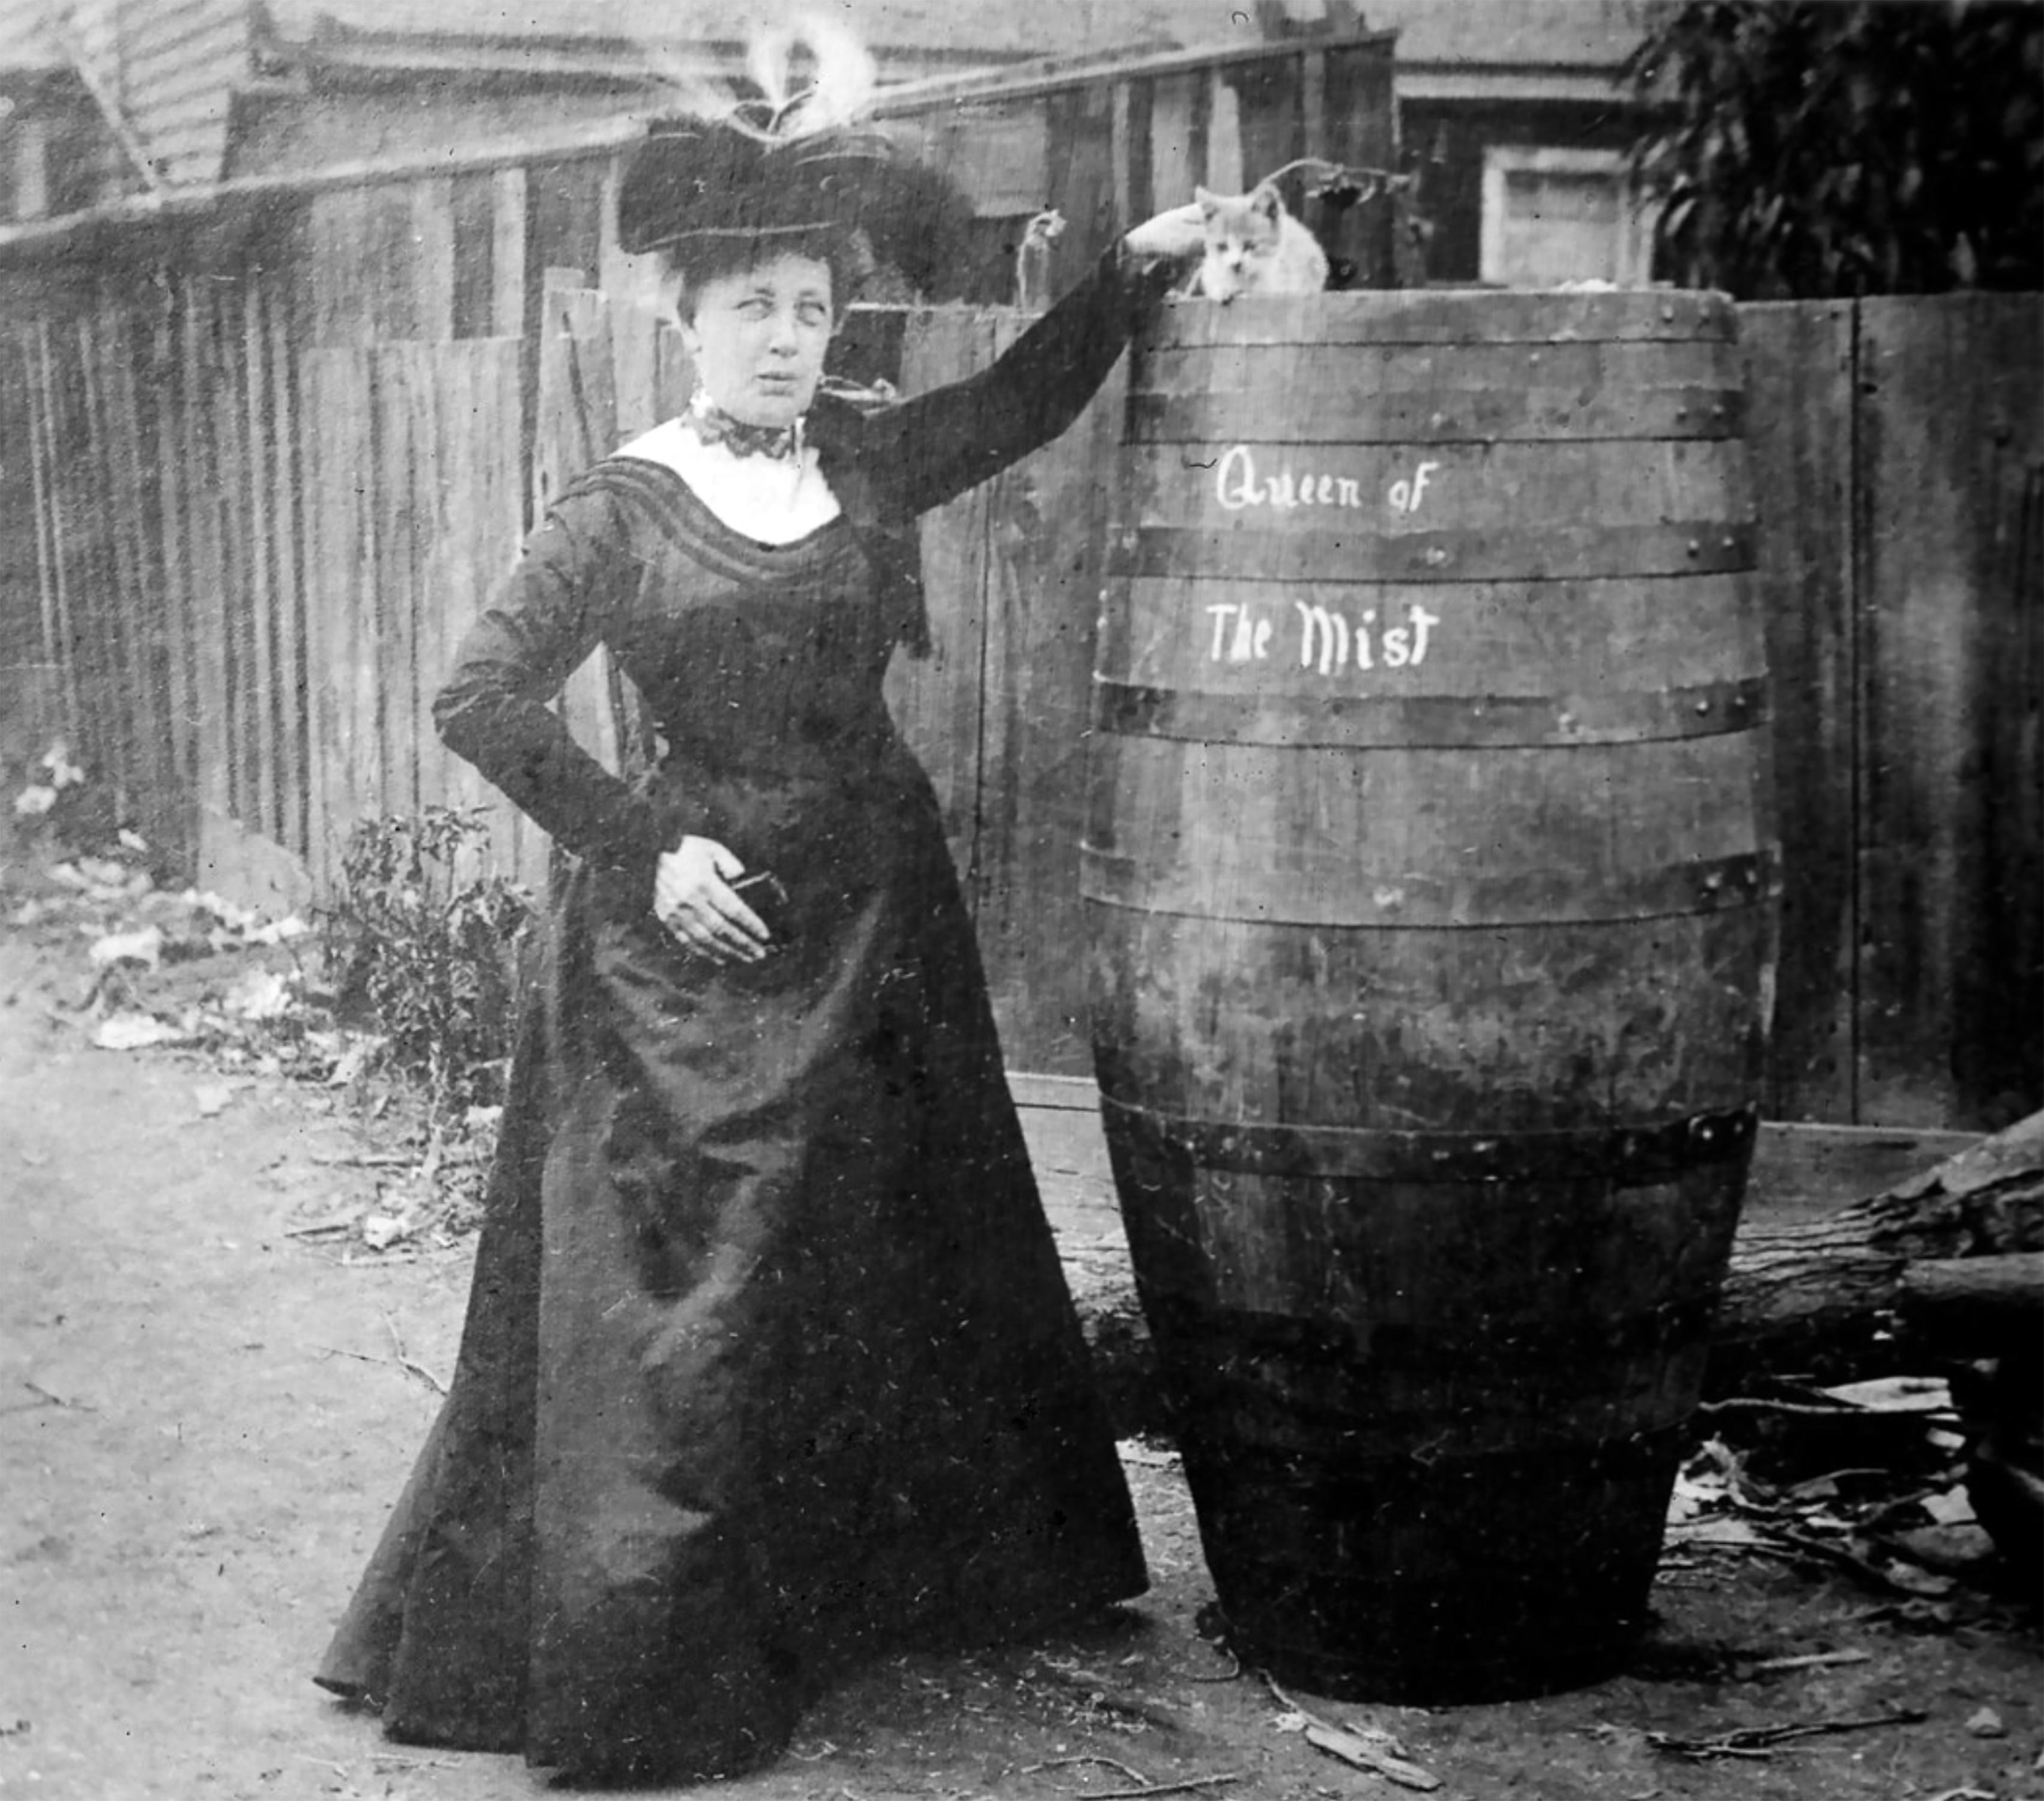 A woman in a high-necked, long dress with long sleeves and ornate hat standing next to a &quot;Queen of the Mist&quot; barrel